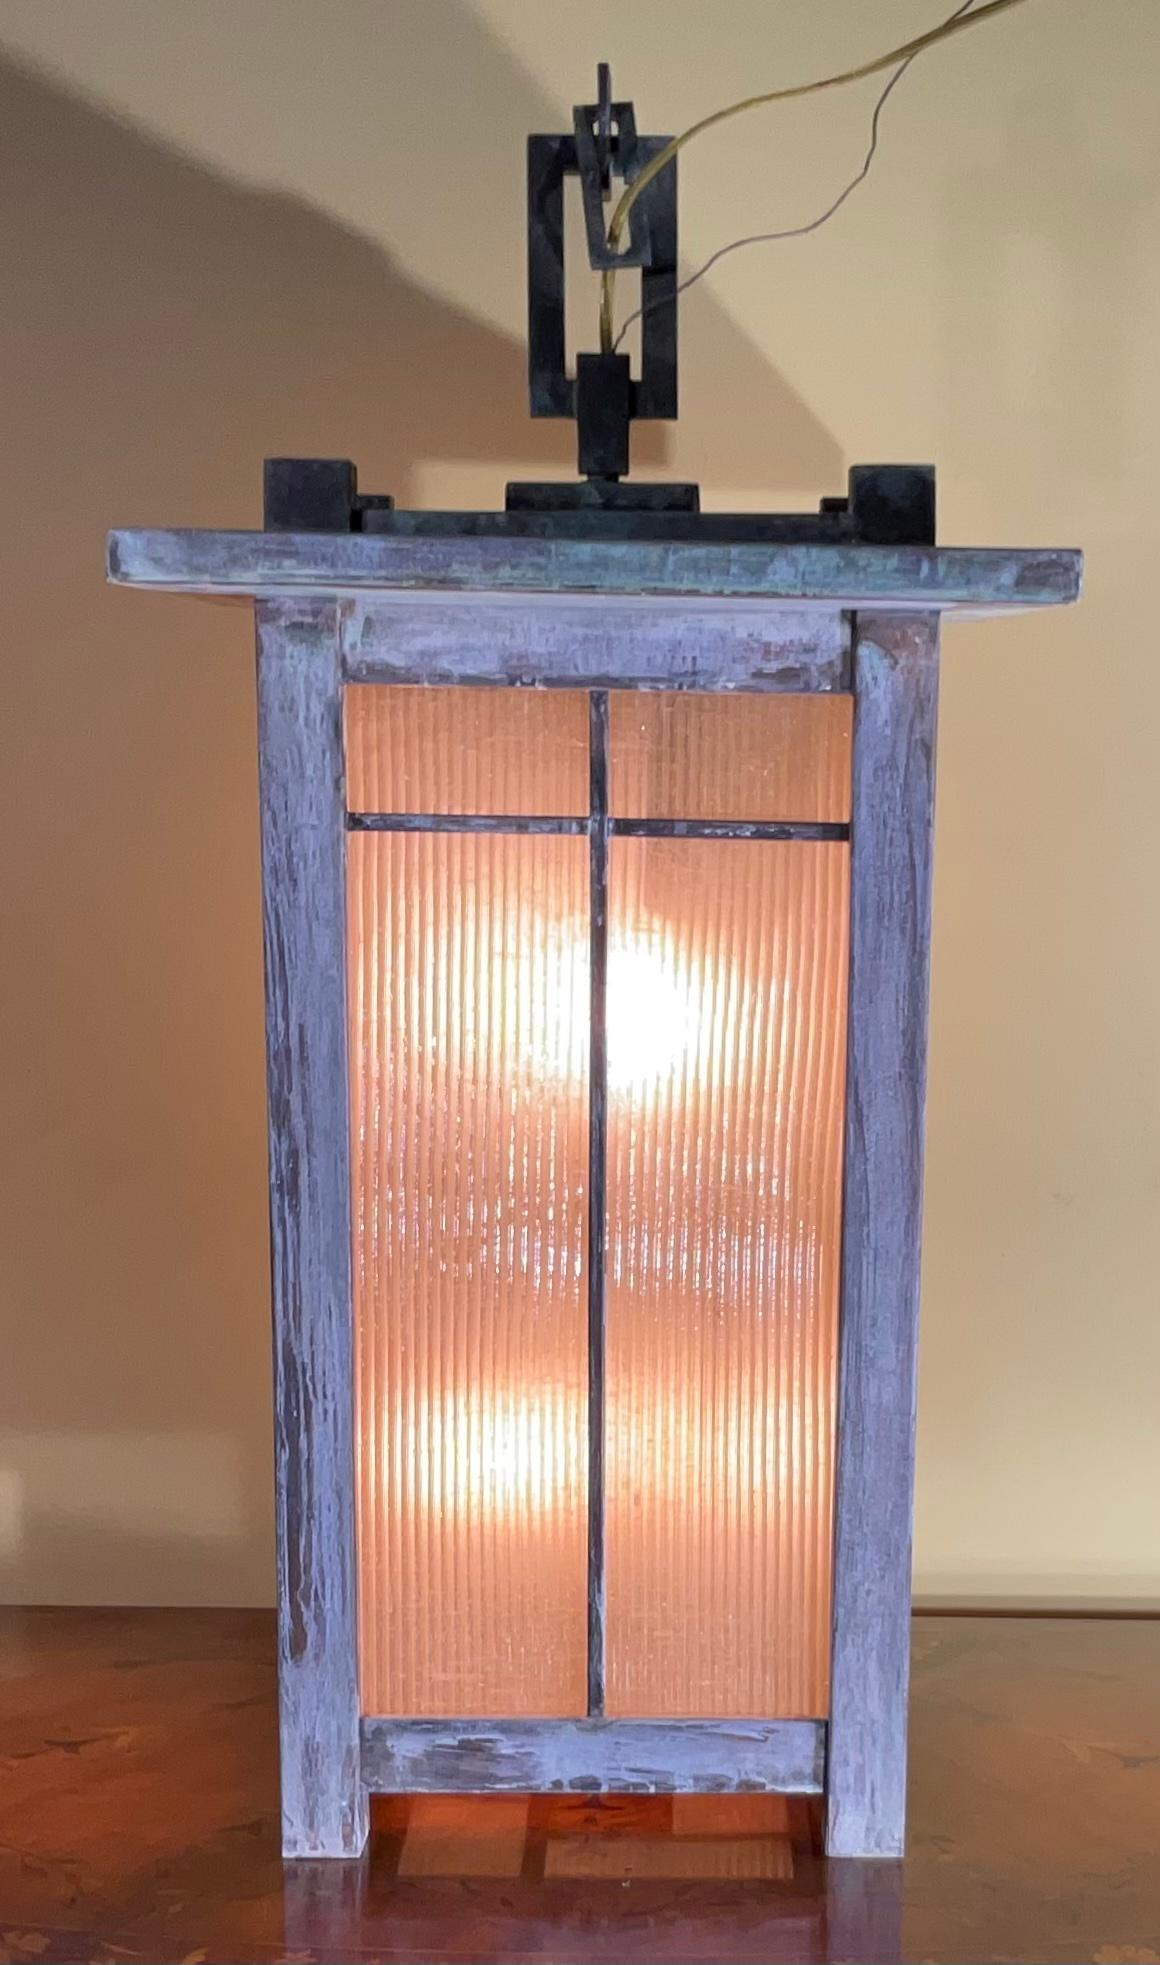 Quality handmade of solid copper art and craft hanging lantern with four 60 watt lights, four side art glass.
Made in the US .
Could be used in wet location and indoor.
 